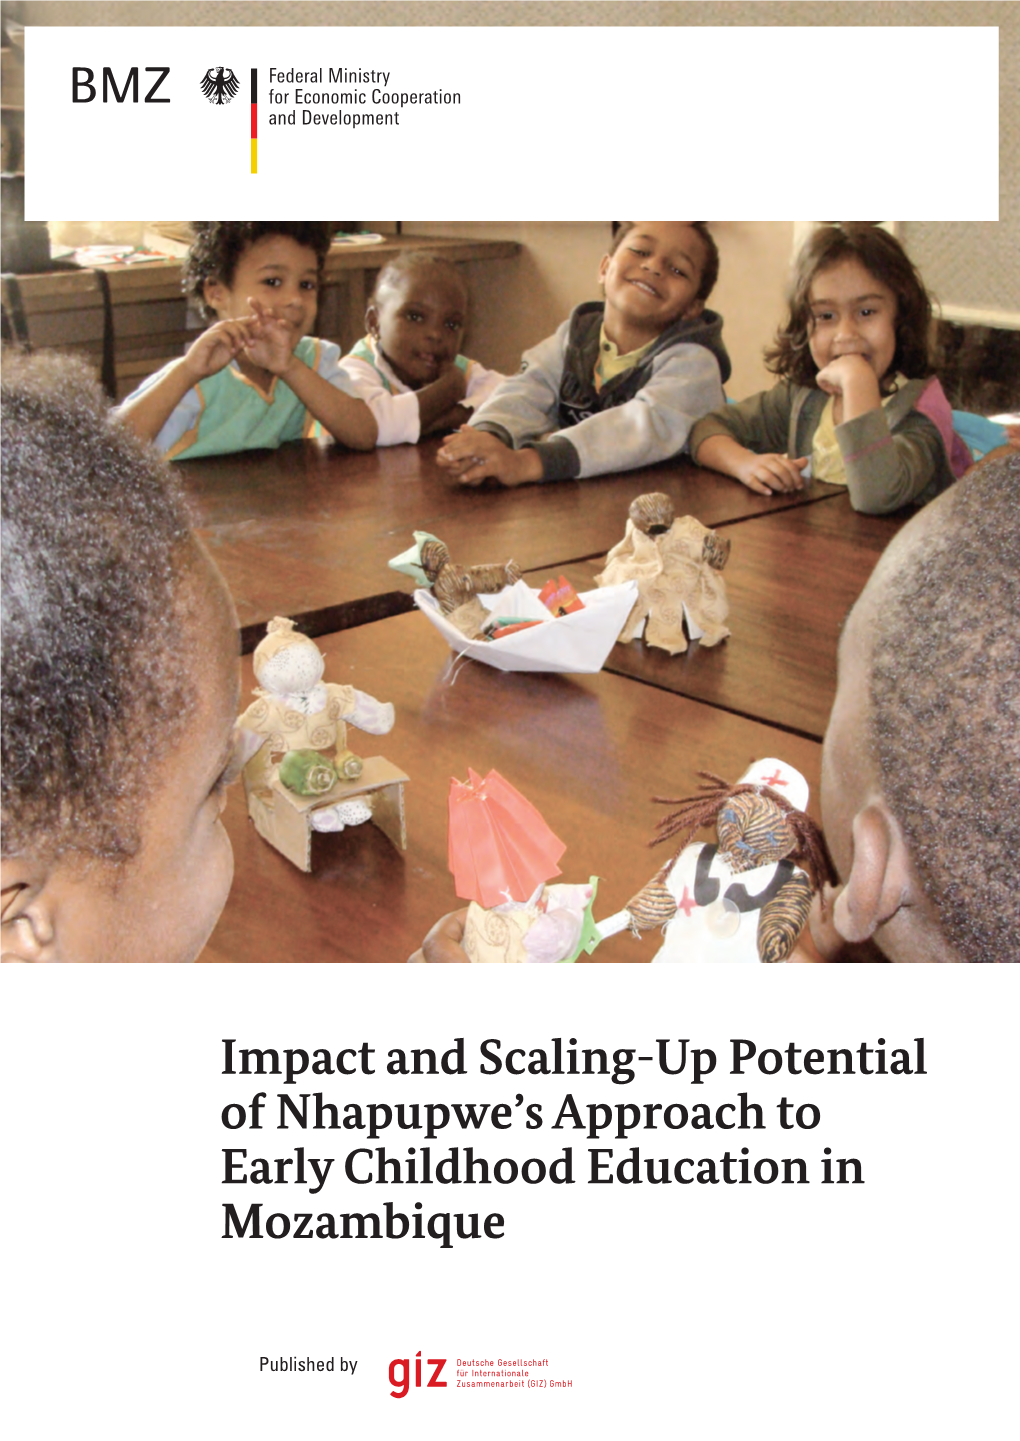 Impact and Scaling-Up Potential of Nhapupwe's Approach to Early